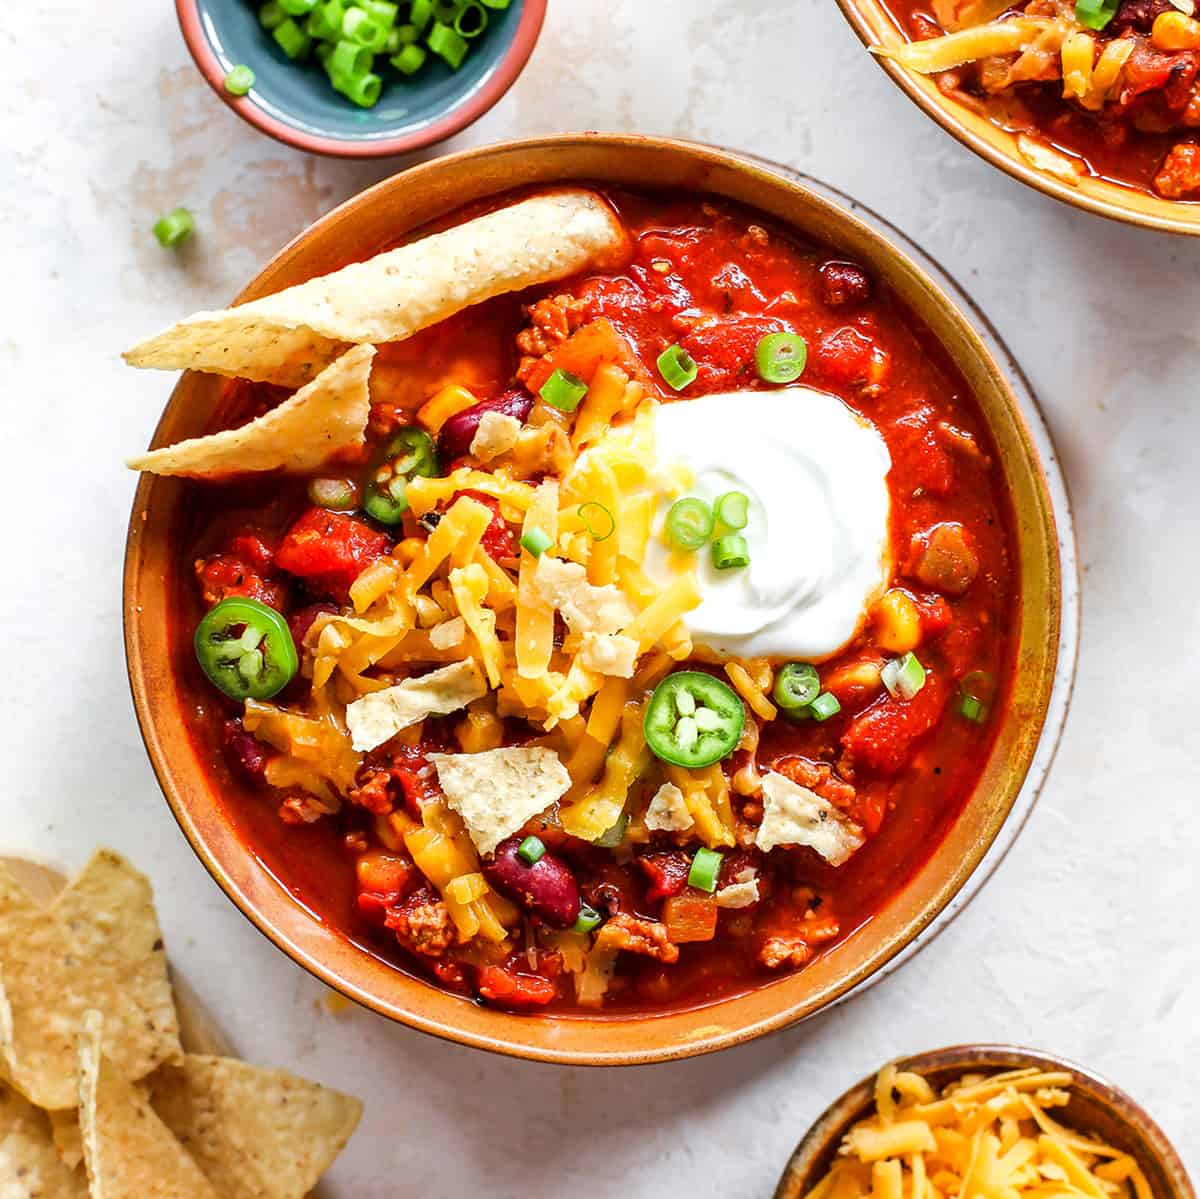 Easy Turkey Chili - Cooking Made Healthy